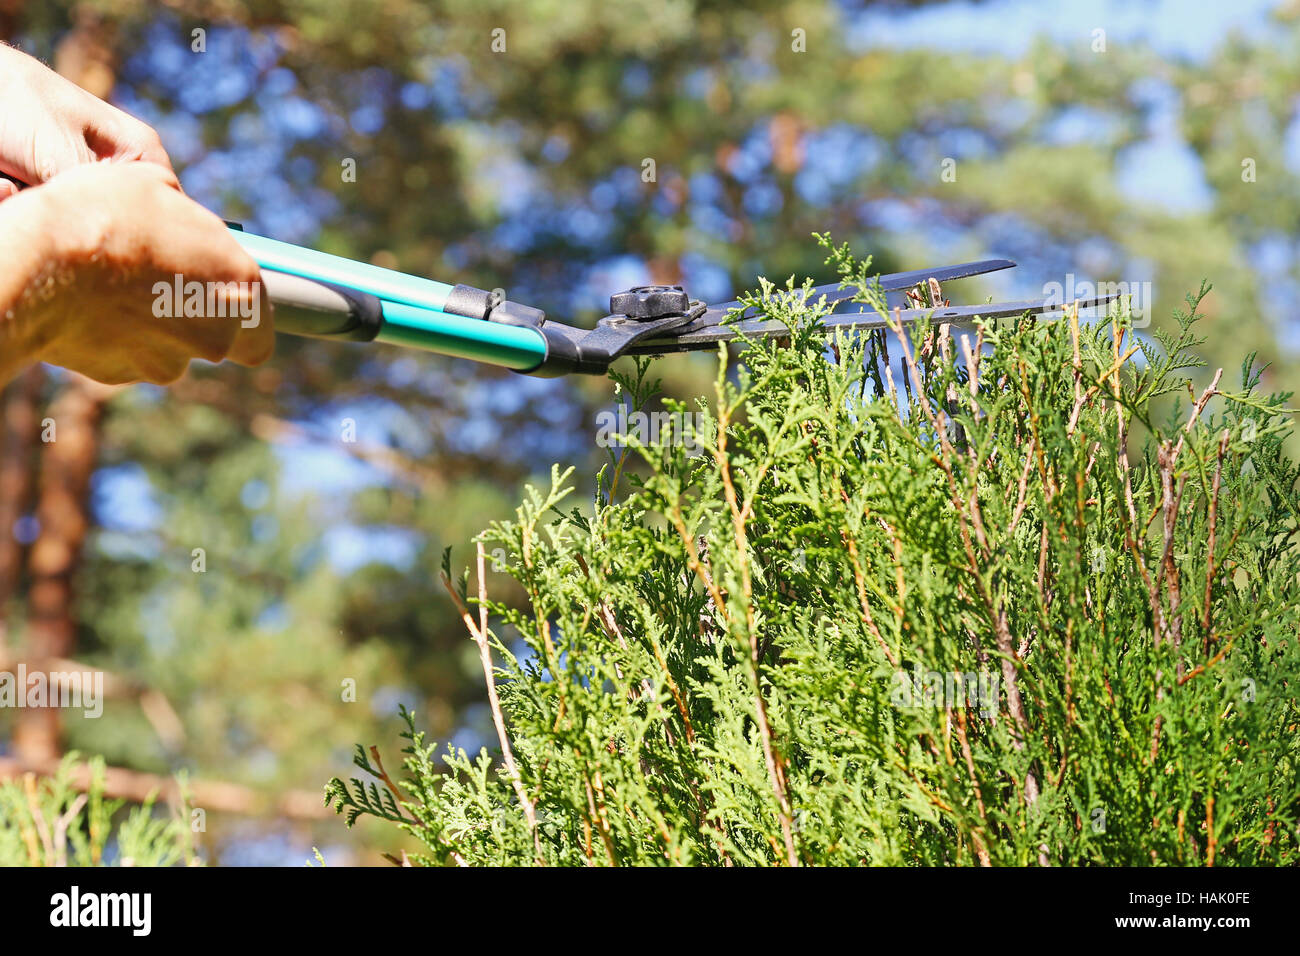 gardener cutting a hedge with a pruning scissors Stock Photo